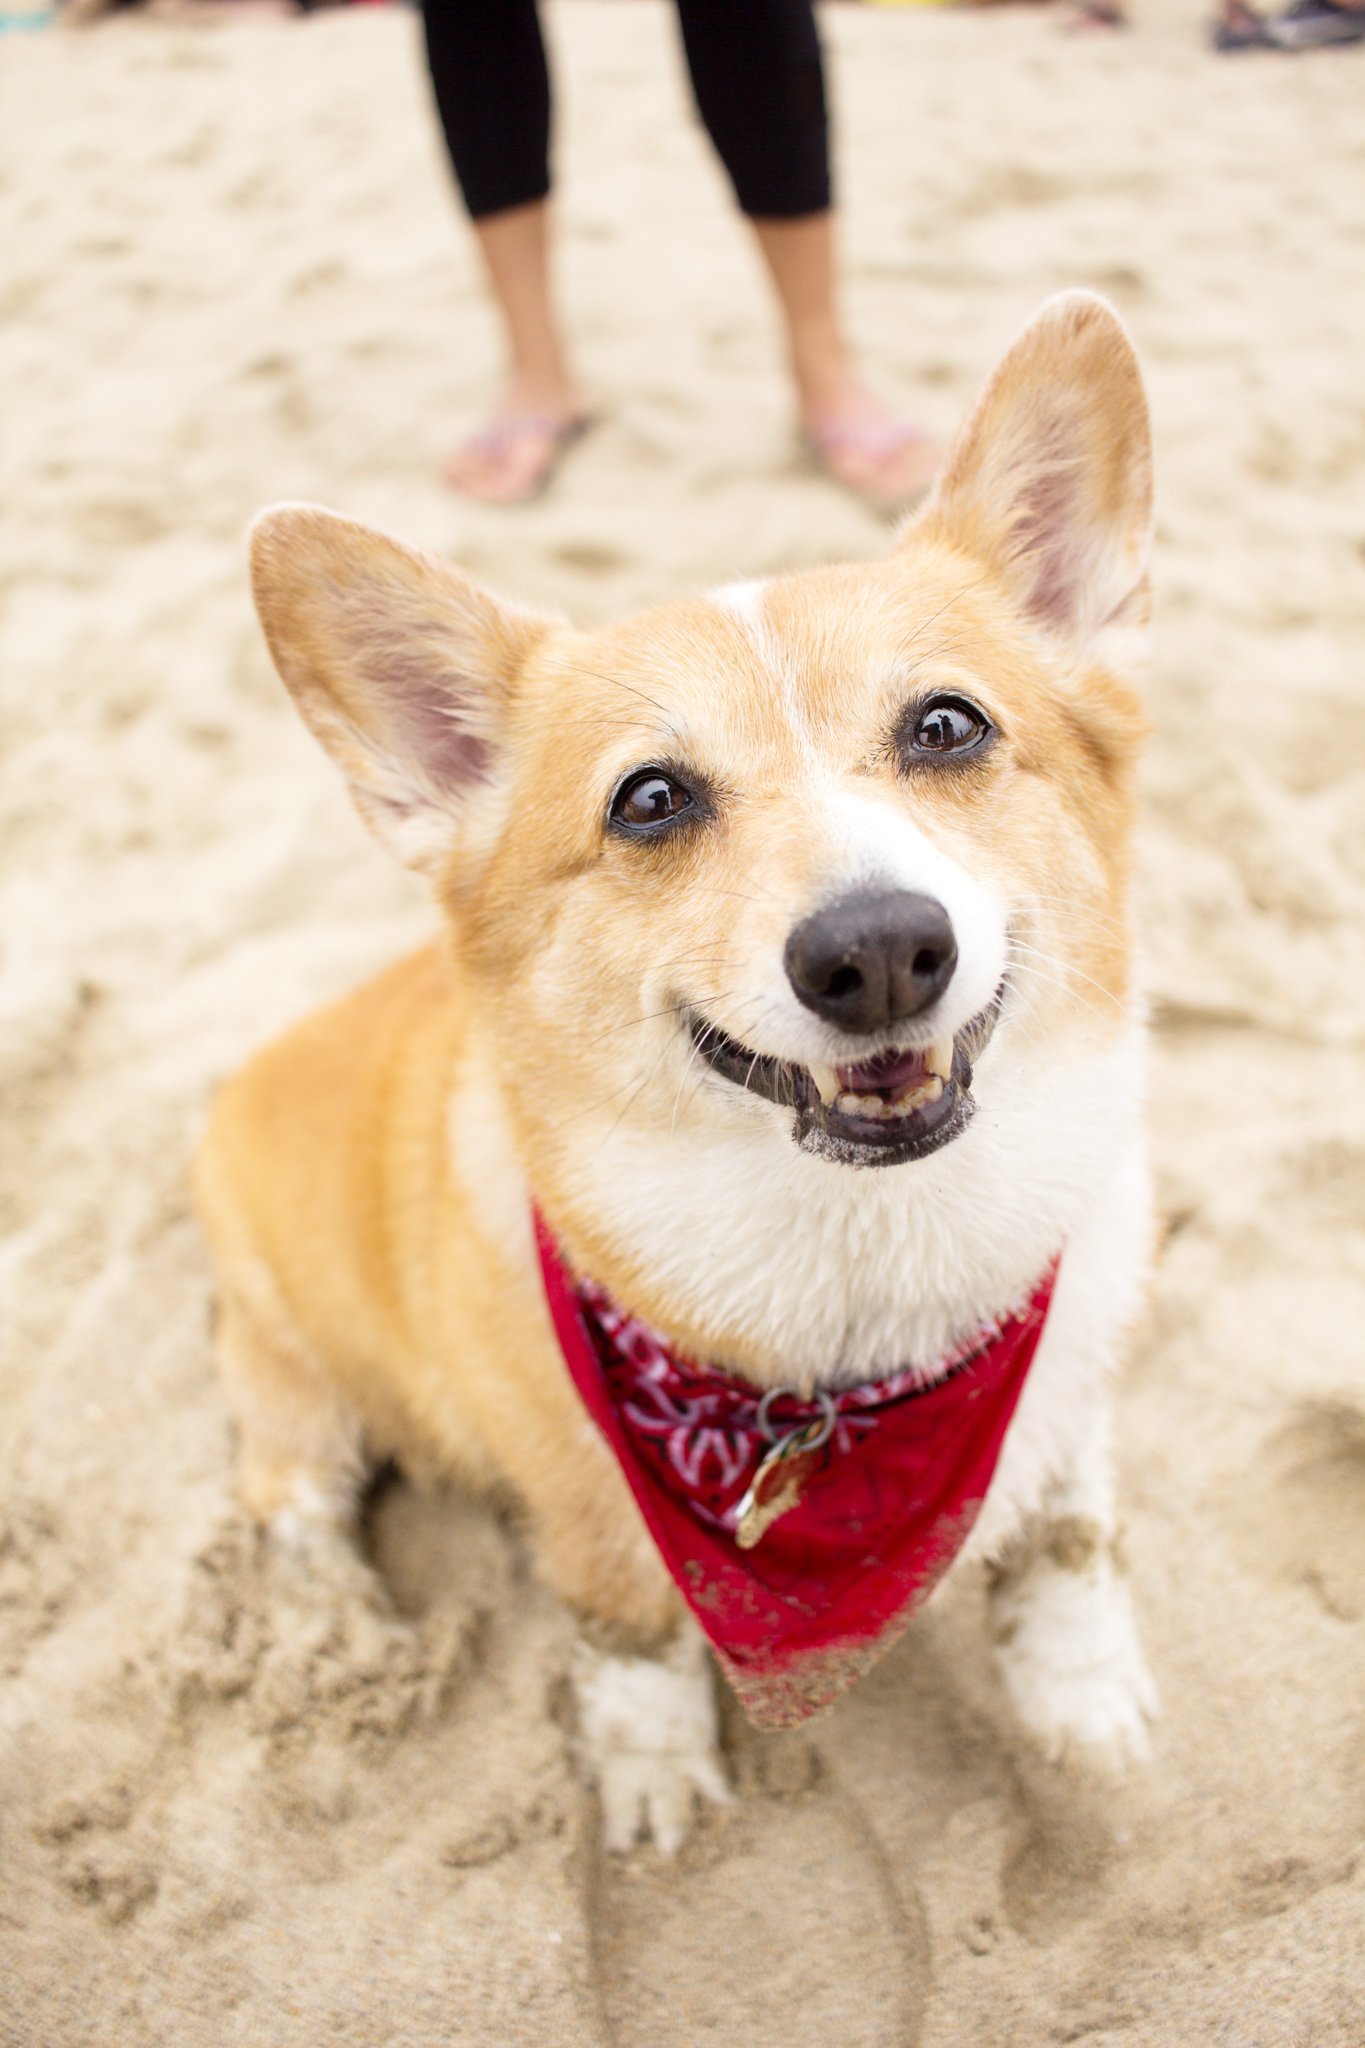 134-Orange County Pet and Dog Photography - by Steamer Lee - Corgi Beach Day - Southern Caliornia.JPG